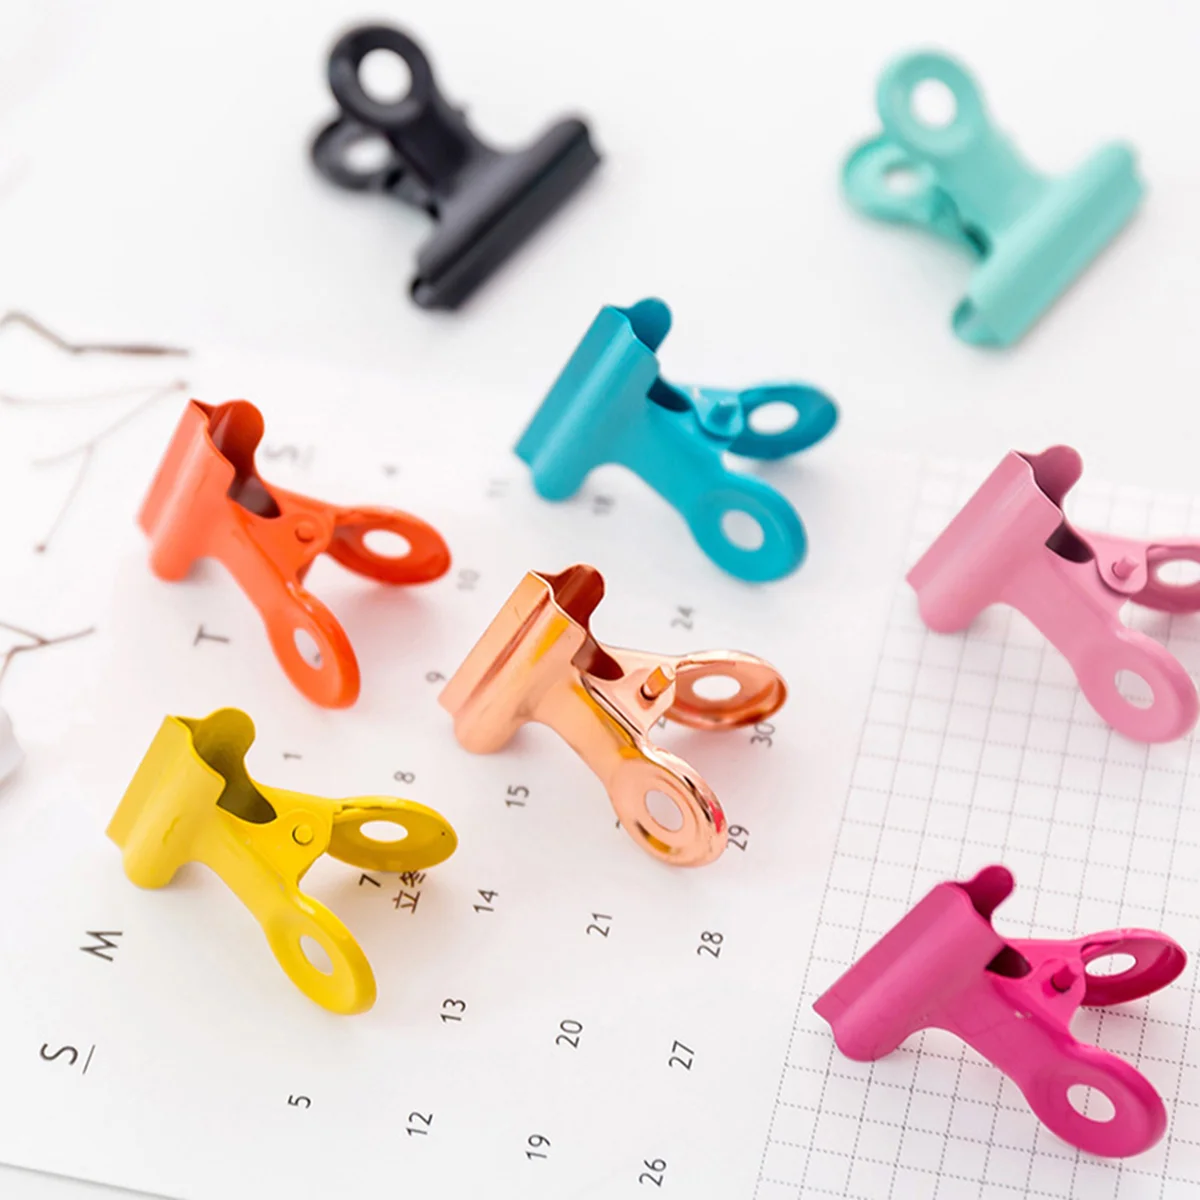 

Receipt Clip Candy Color Invoice Clip Simple Organizer Clip for Home Office School Supplies